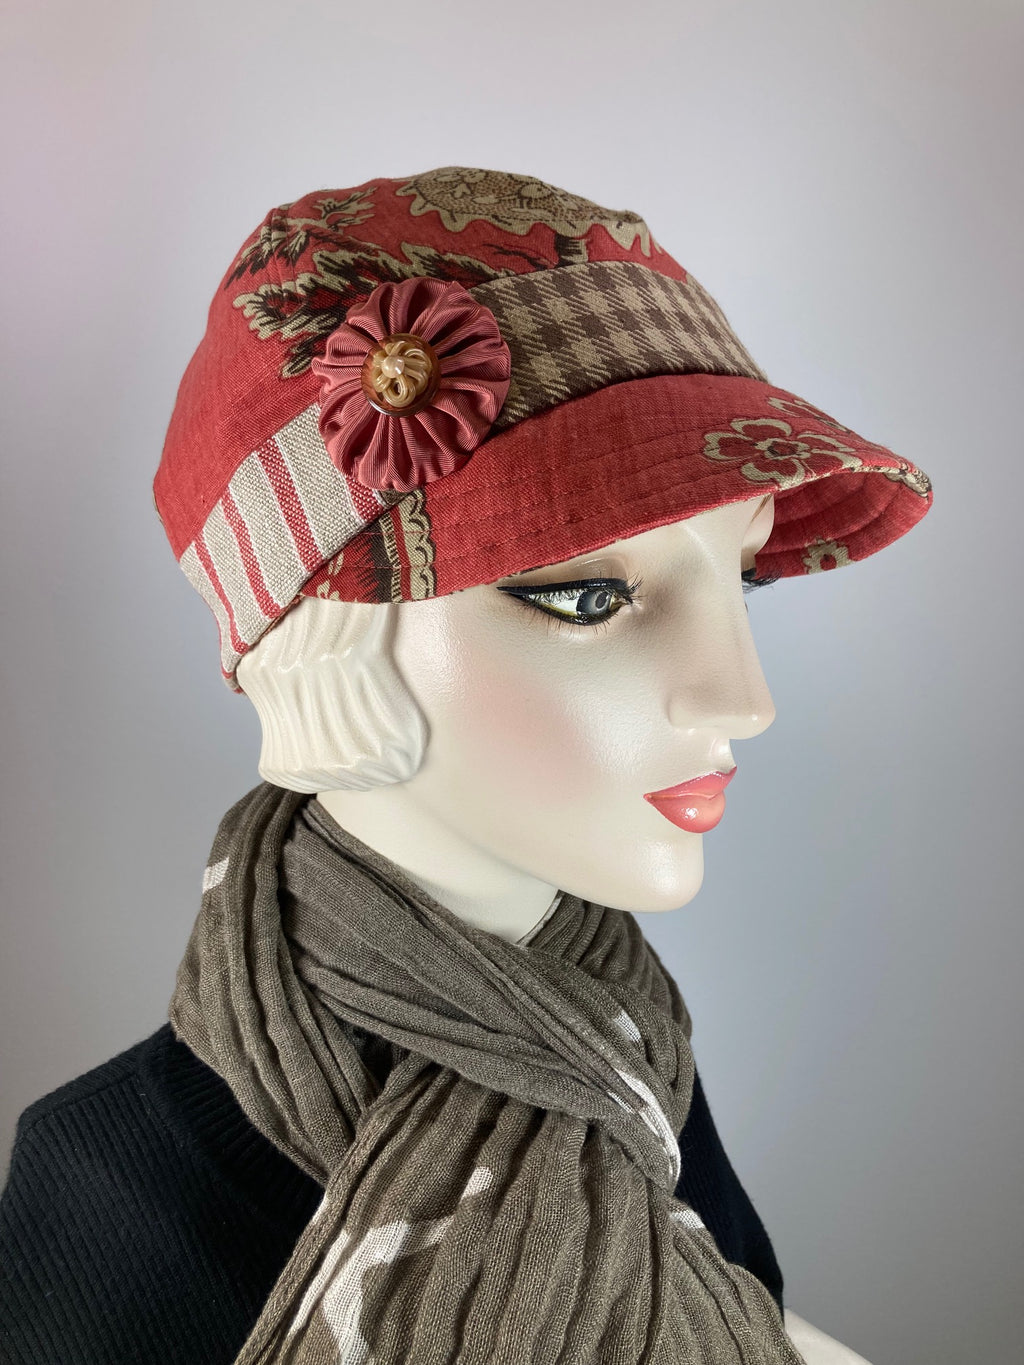 Women's Linen Cap Baseball. Newsboy Cap Russet tan floral. Cool summer casual hat. Sustainable fabric Eco friendly hat. Red cabby cap 